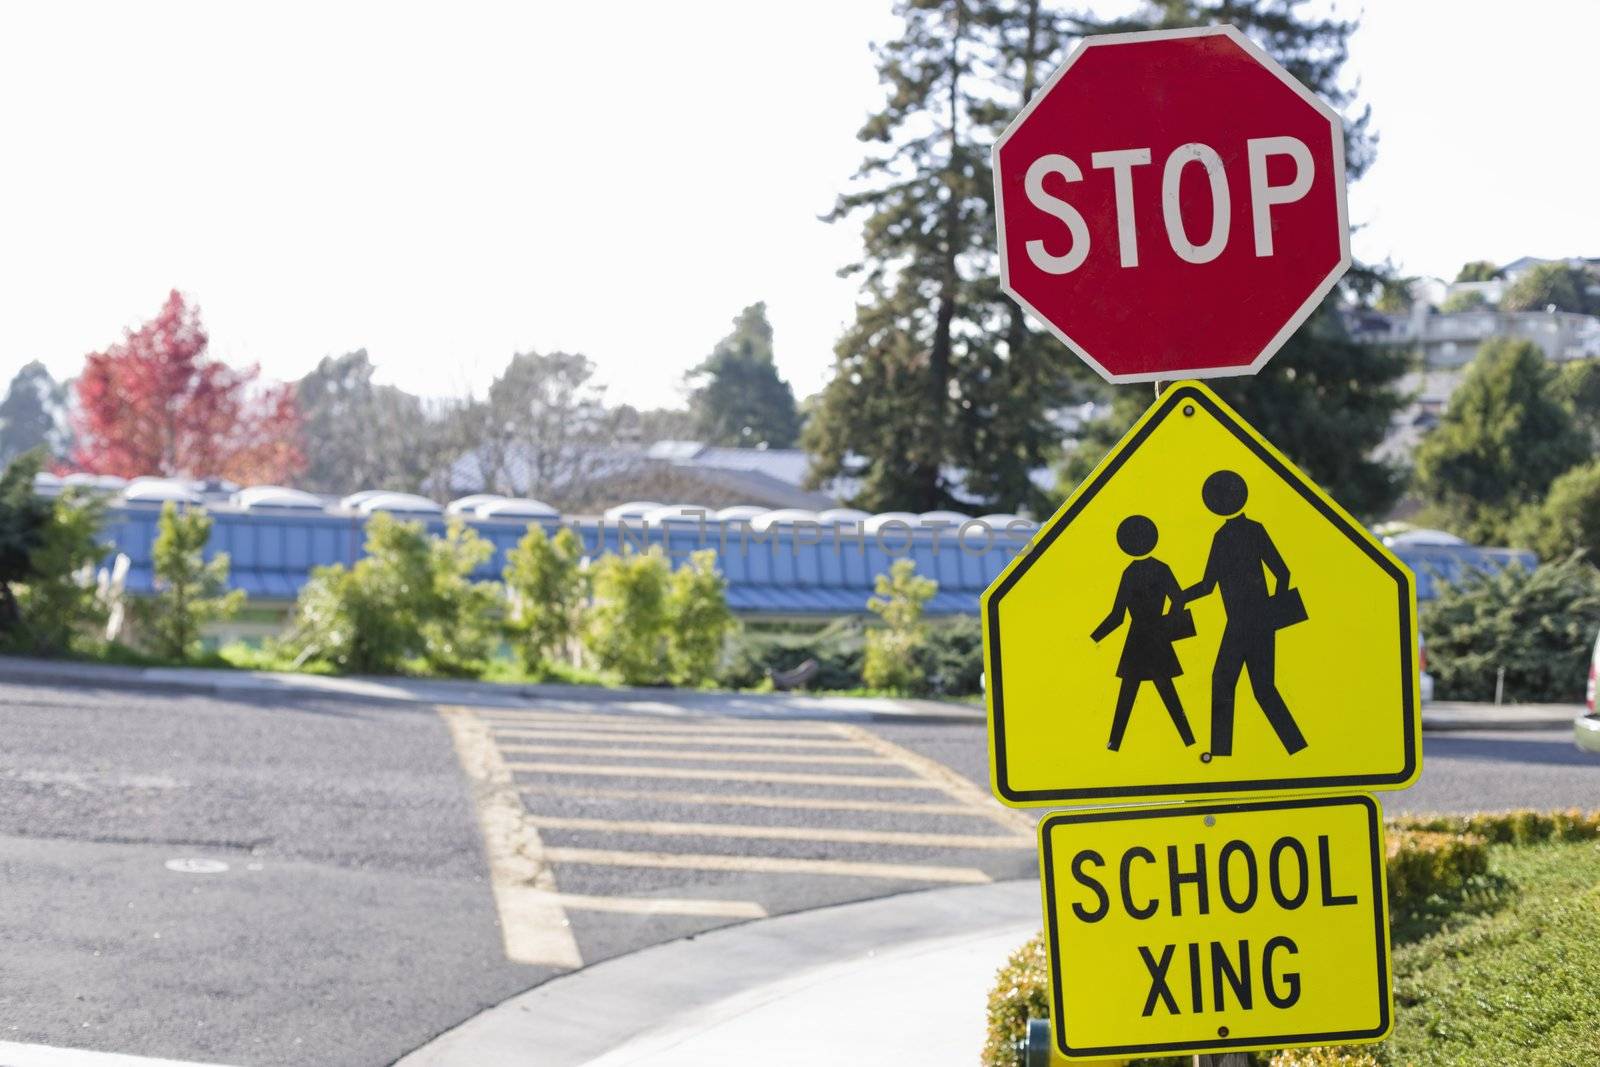 School Crosswalk With Stop Sign and School Xing Signs